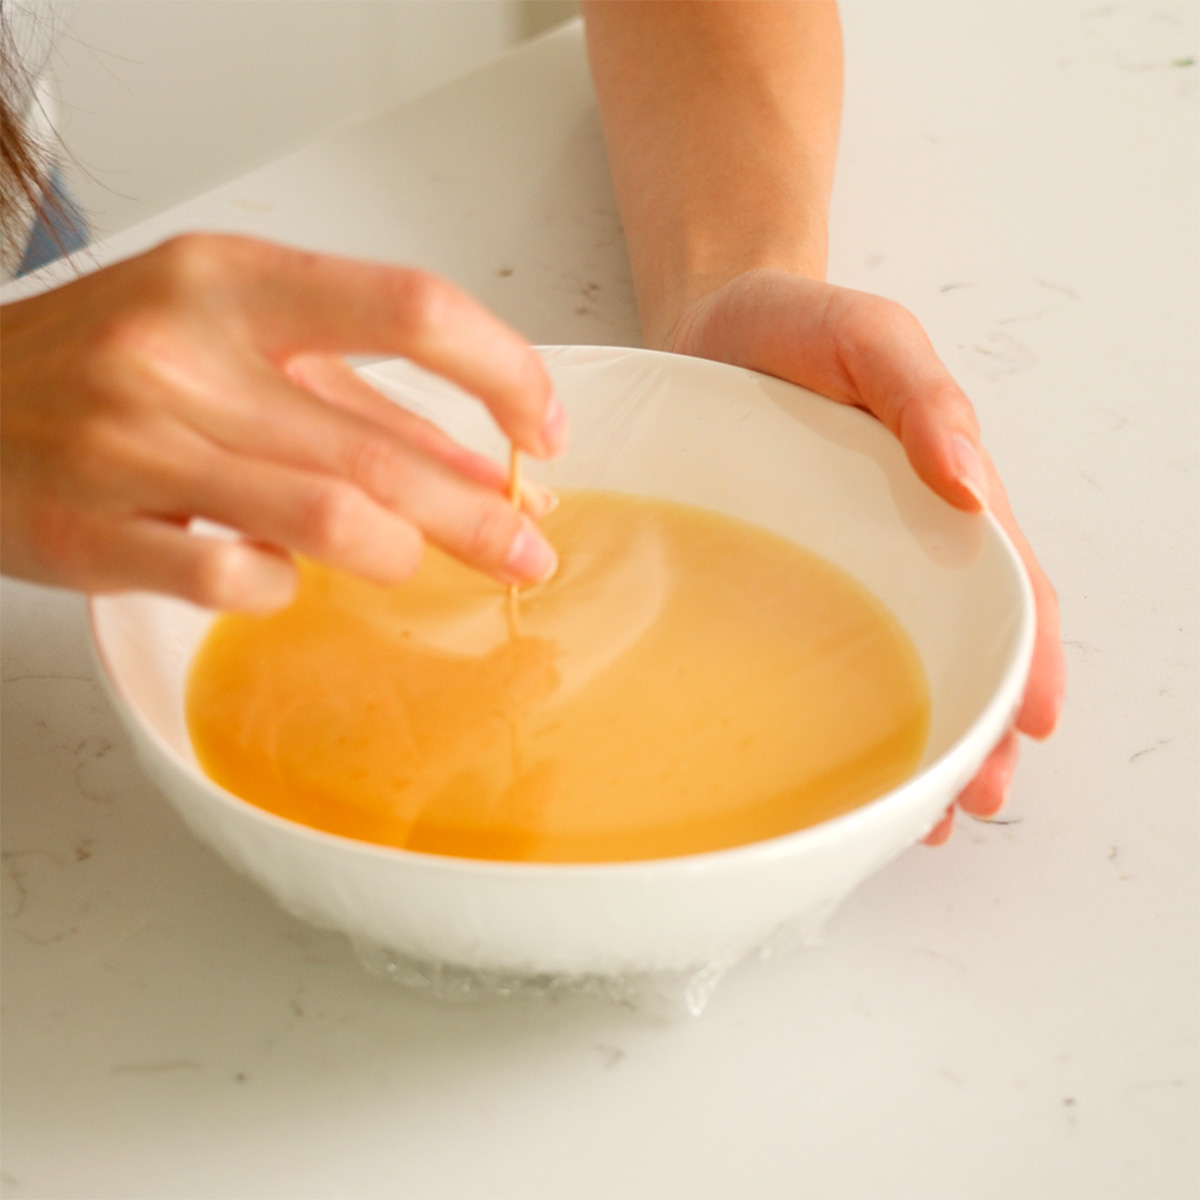 Poking holes into a plastic wrapped bowl with egg mixture inside.